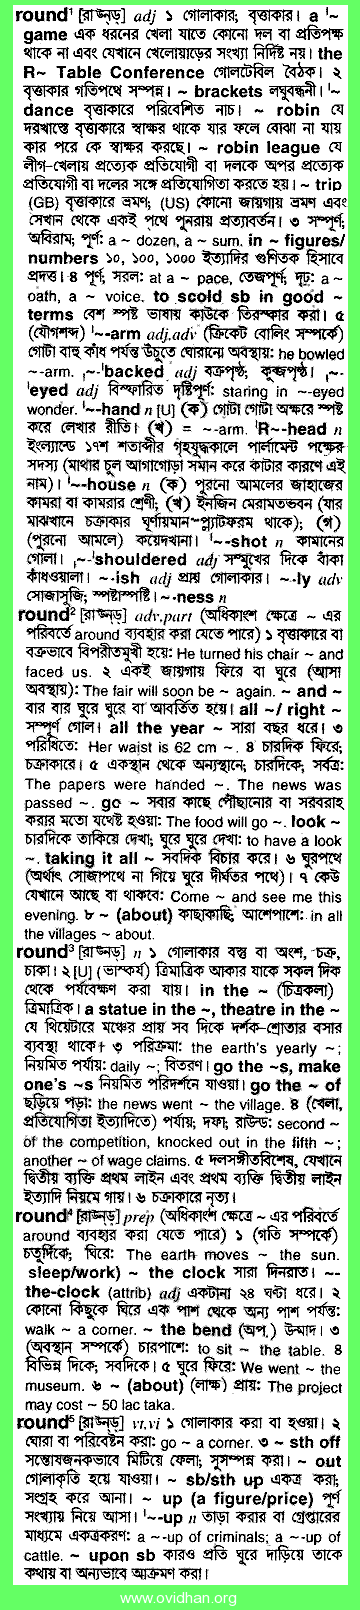 Meaning of opening with pronunciation - English 2 Bangla / English  Dictionary